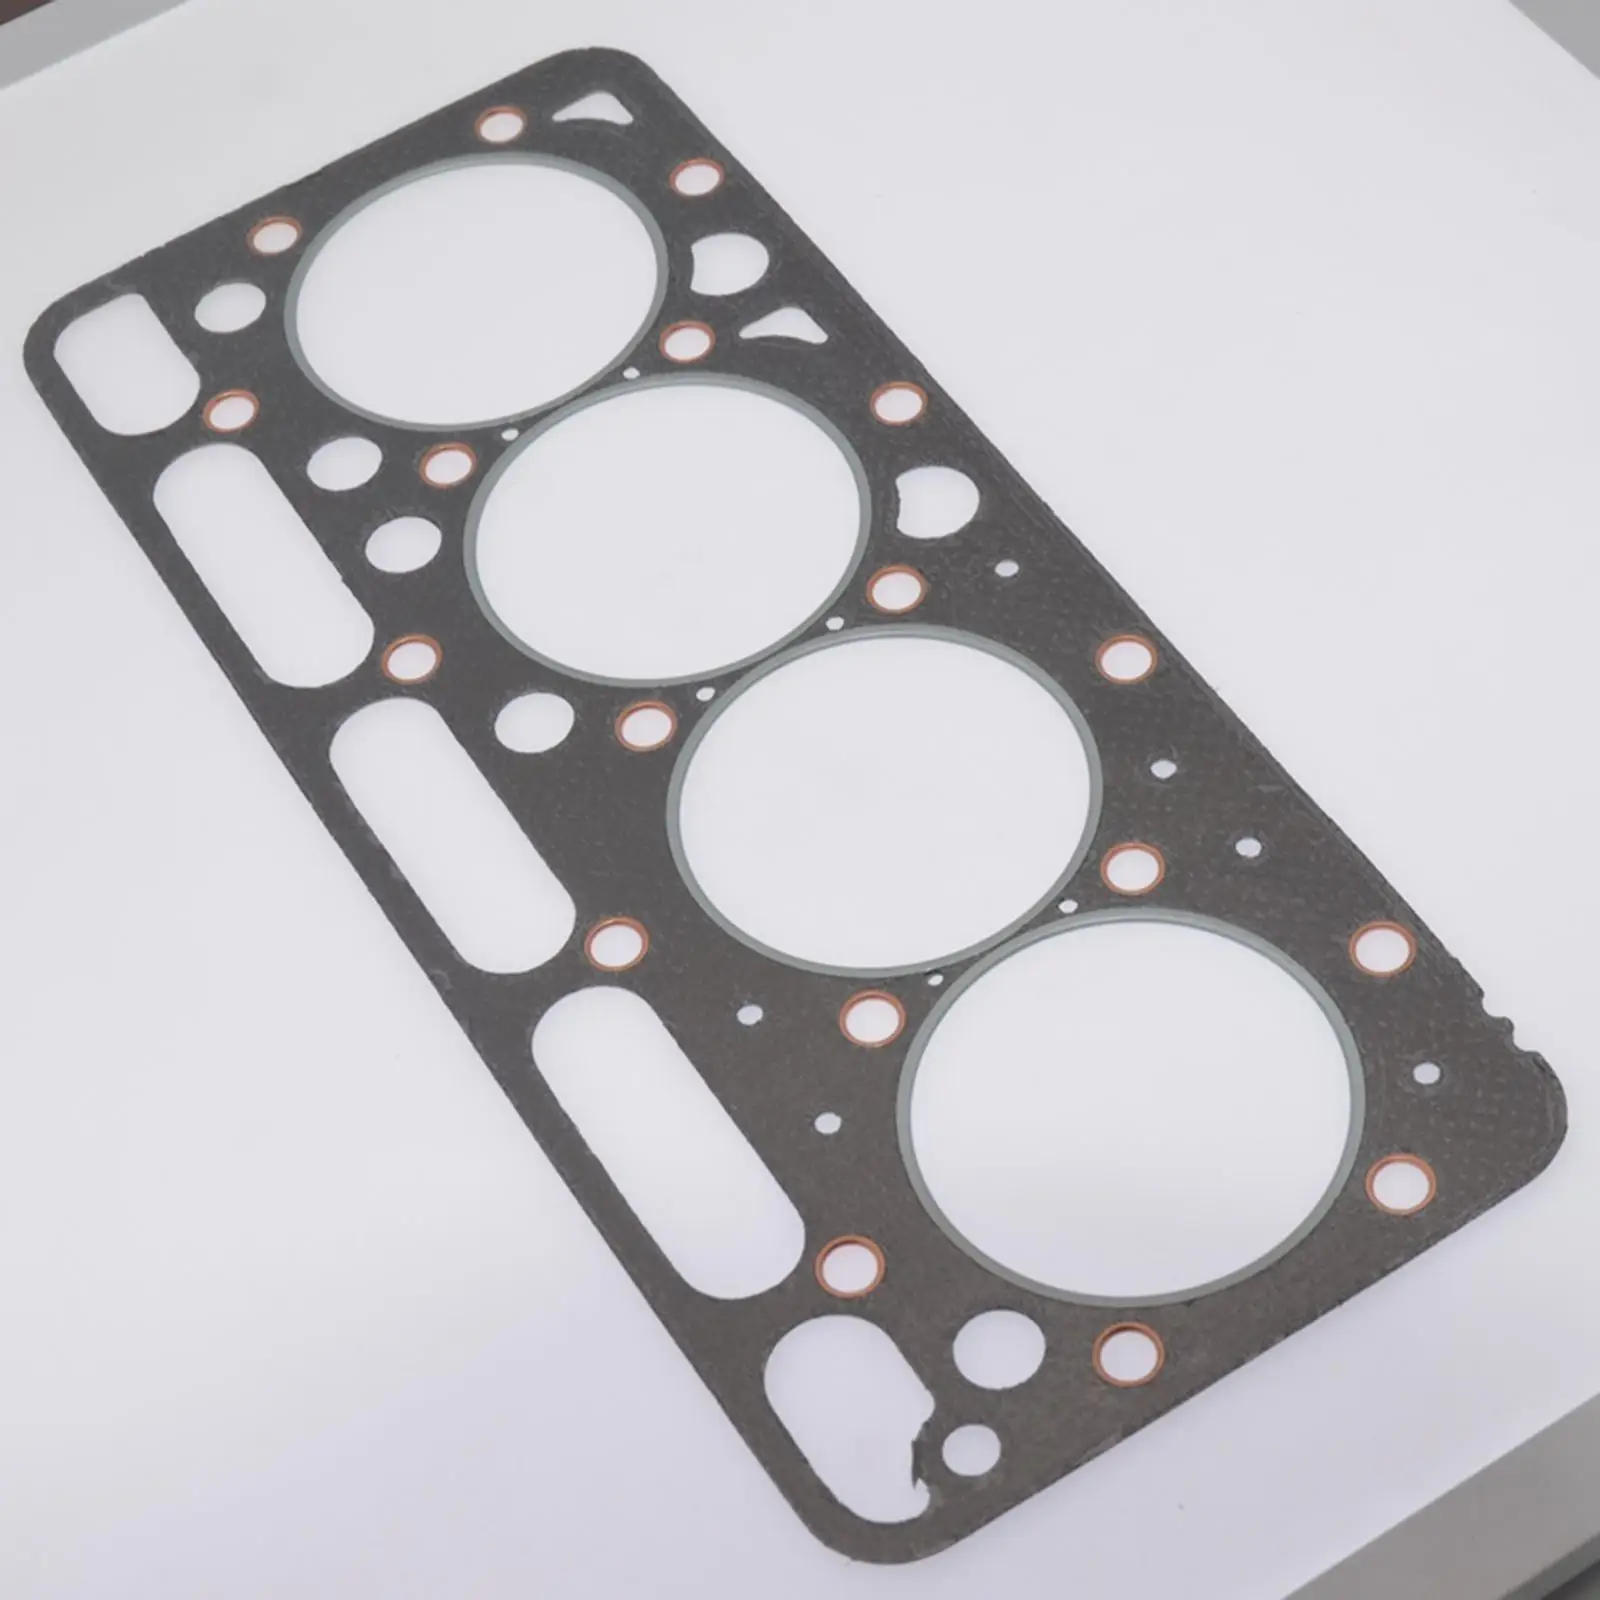 19077-03310 Head Gasket Direct Replaces Accessories High Quality Easy to Install Composite Metal Durable for Kubota Bobcat